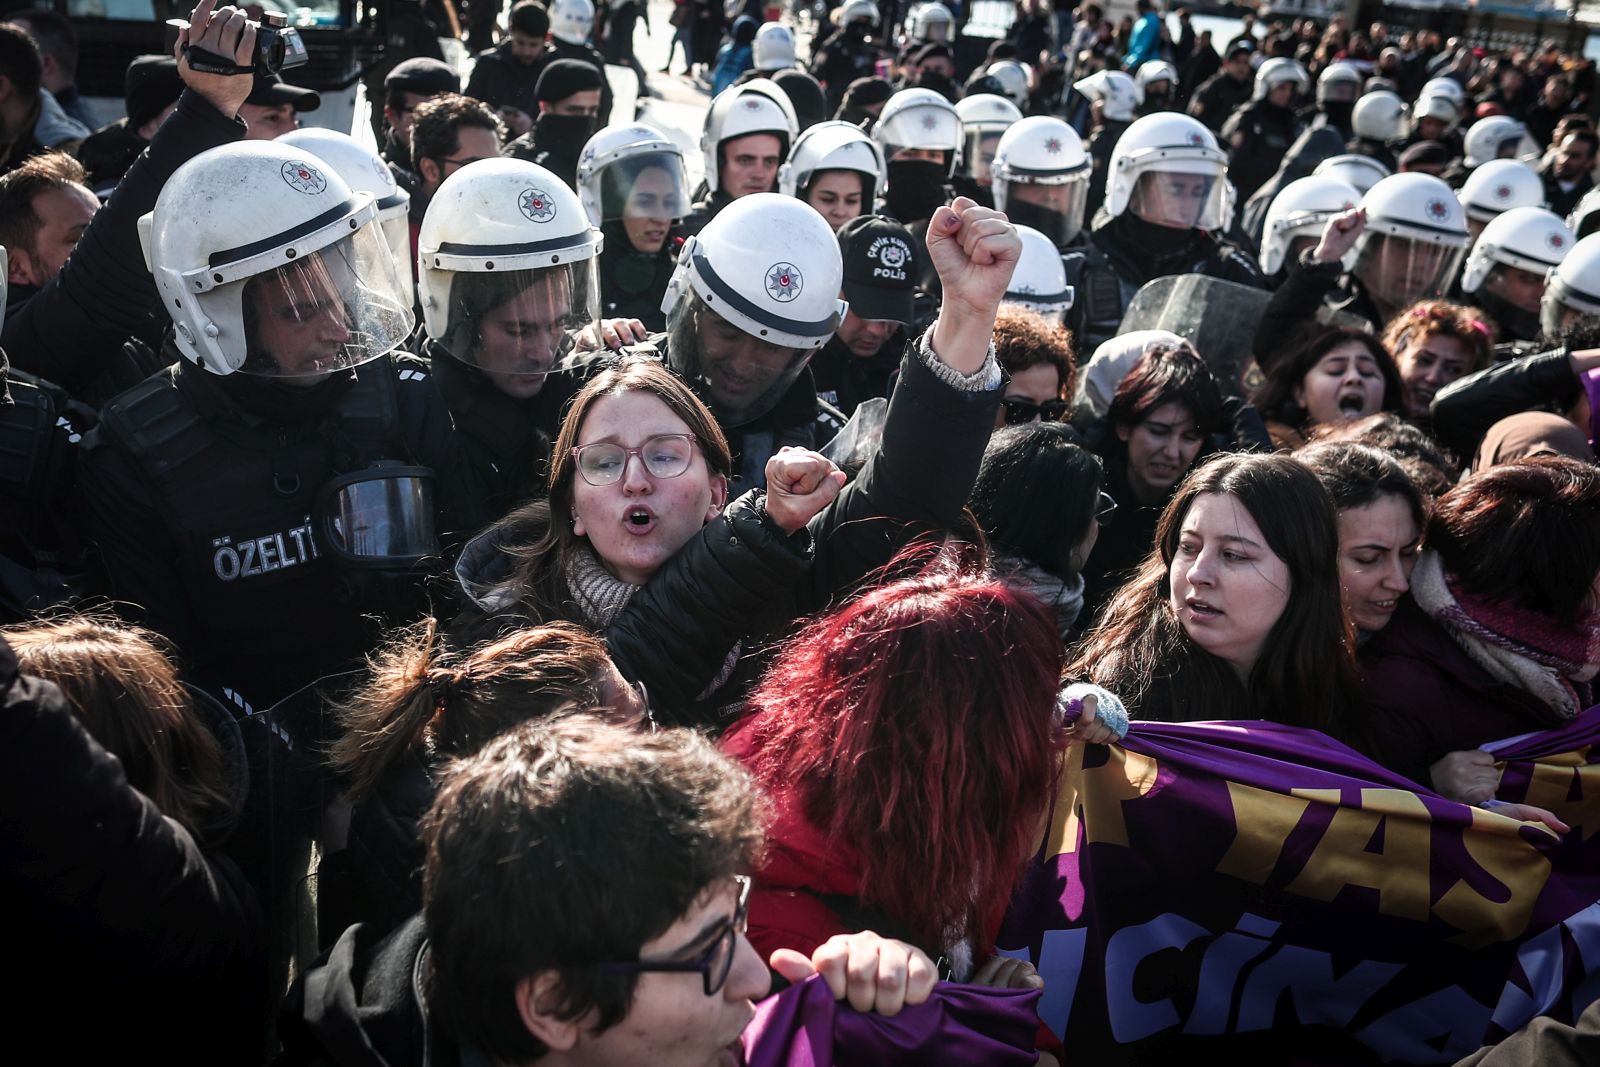 epa10332038 Turkish riot police detain protesters during a demonstration marking the International Day for the Elimination of Violence Against Women in Istanbul, Turkey, 27 November 2022. The International Day for the Elimination of Violence Against Women, celebrated on 25 November annualy, was established in an effort to raise awareness of the fact that women around the world are subject to rape, domestic violence and other forms of violence.  EPA/SEDAT SUNA